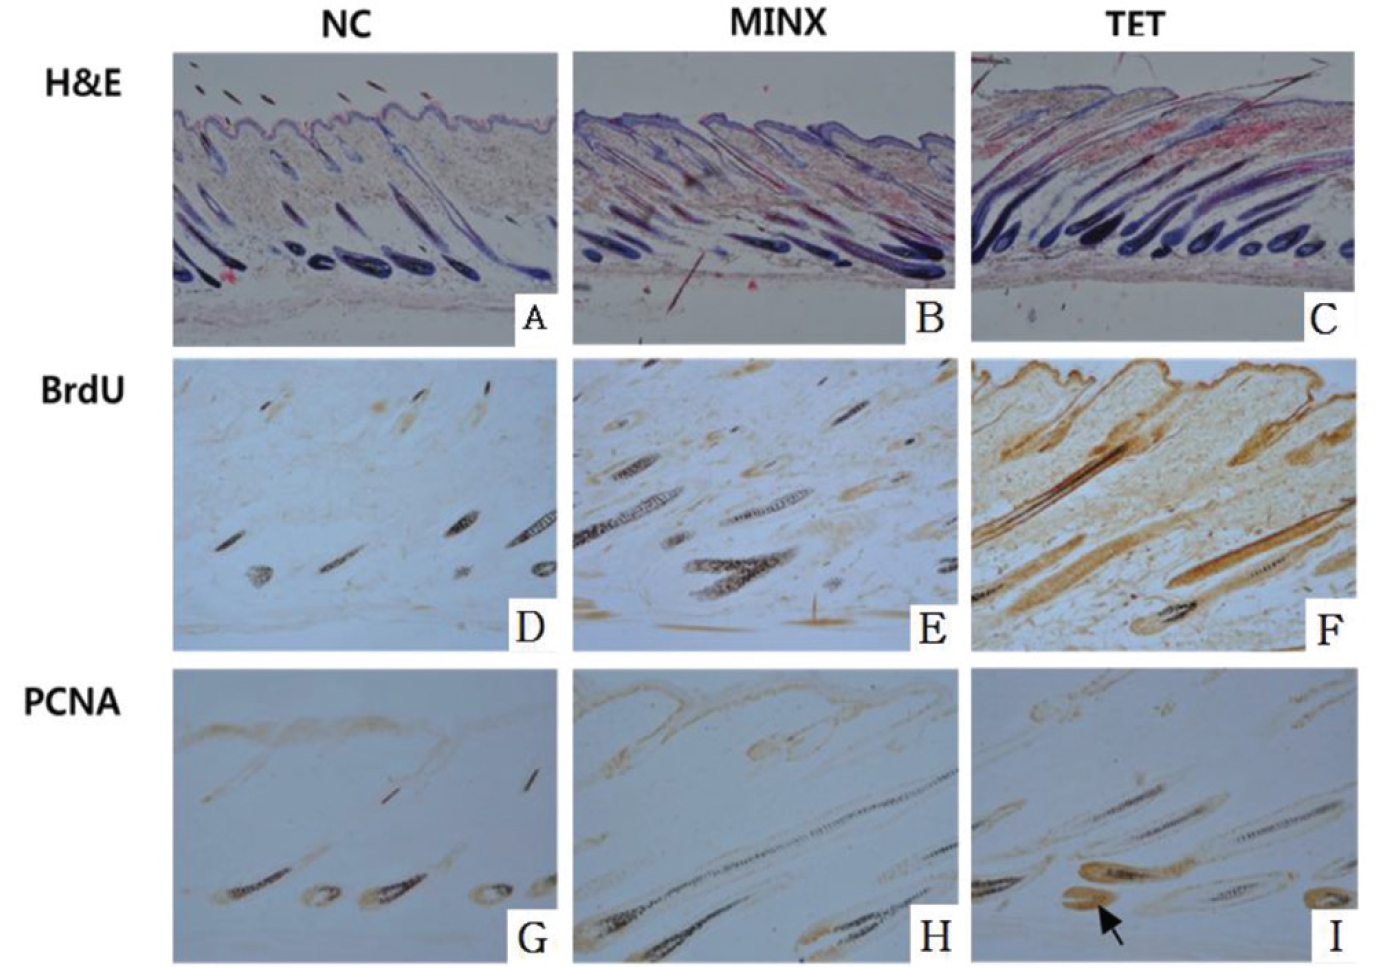 Effects of TET on anagen induction and cellular proliferation in the depilated dorsal skin of C57BL/6 mice.